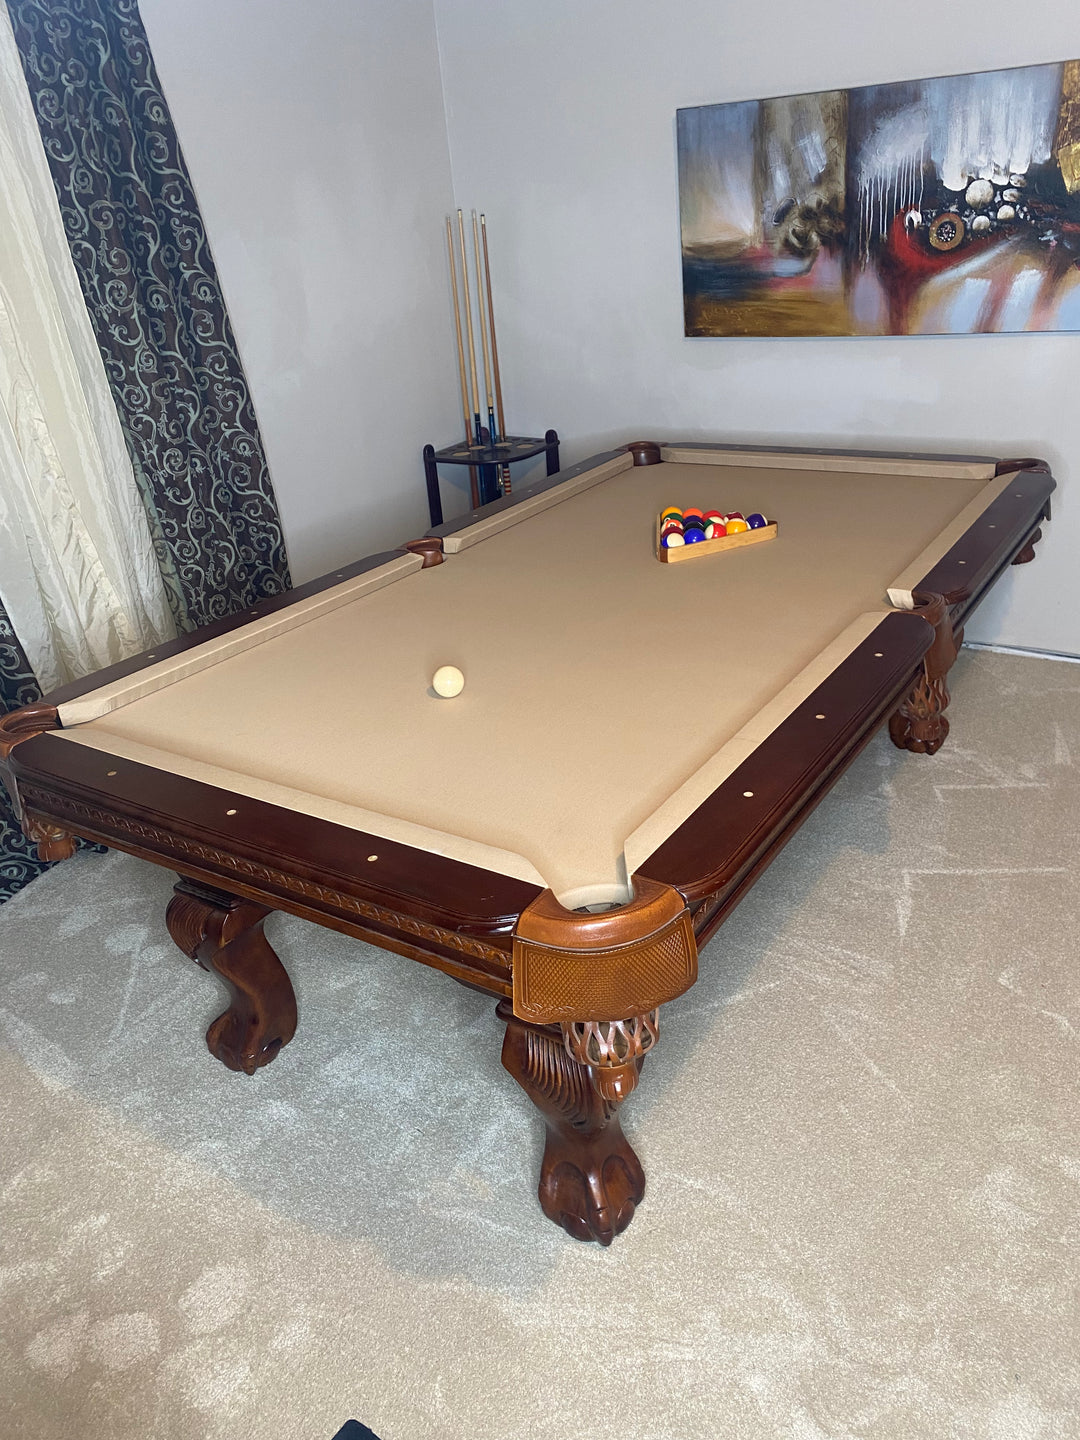 8ft Wooden Pool Table